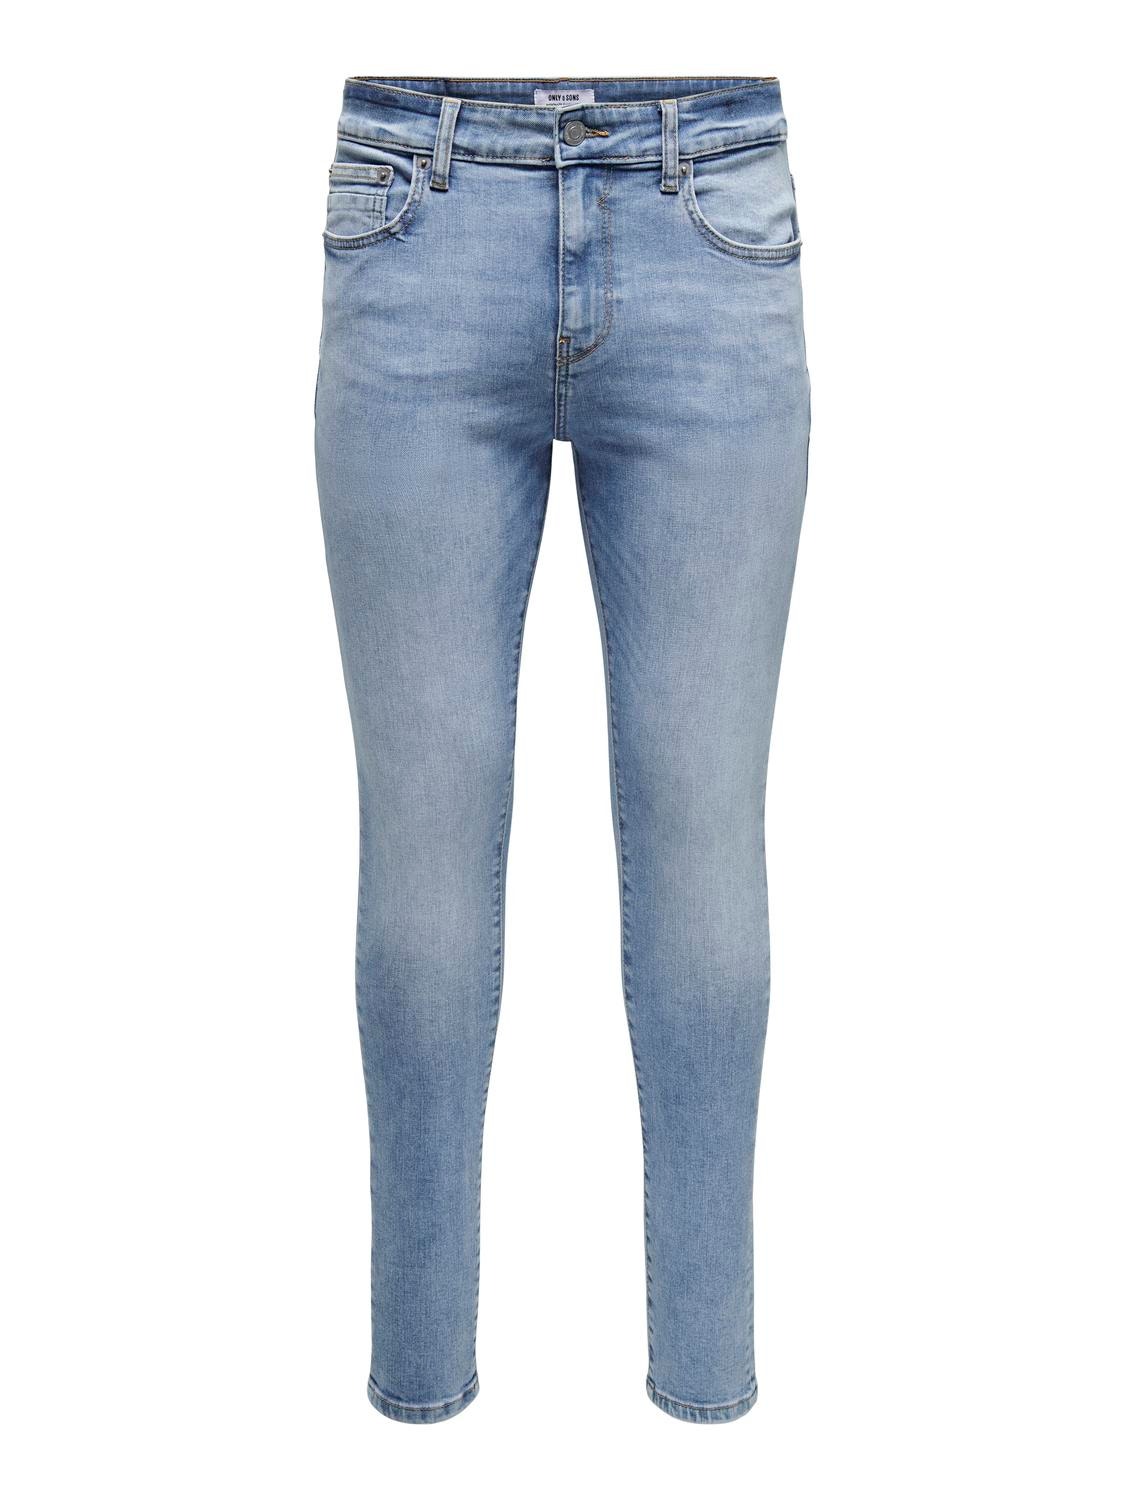 ONLY & SONS Jeans Spray on Fit Taille moyenne -Light Blue Denim - 22027848